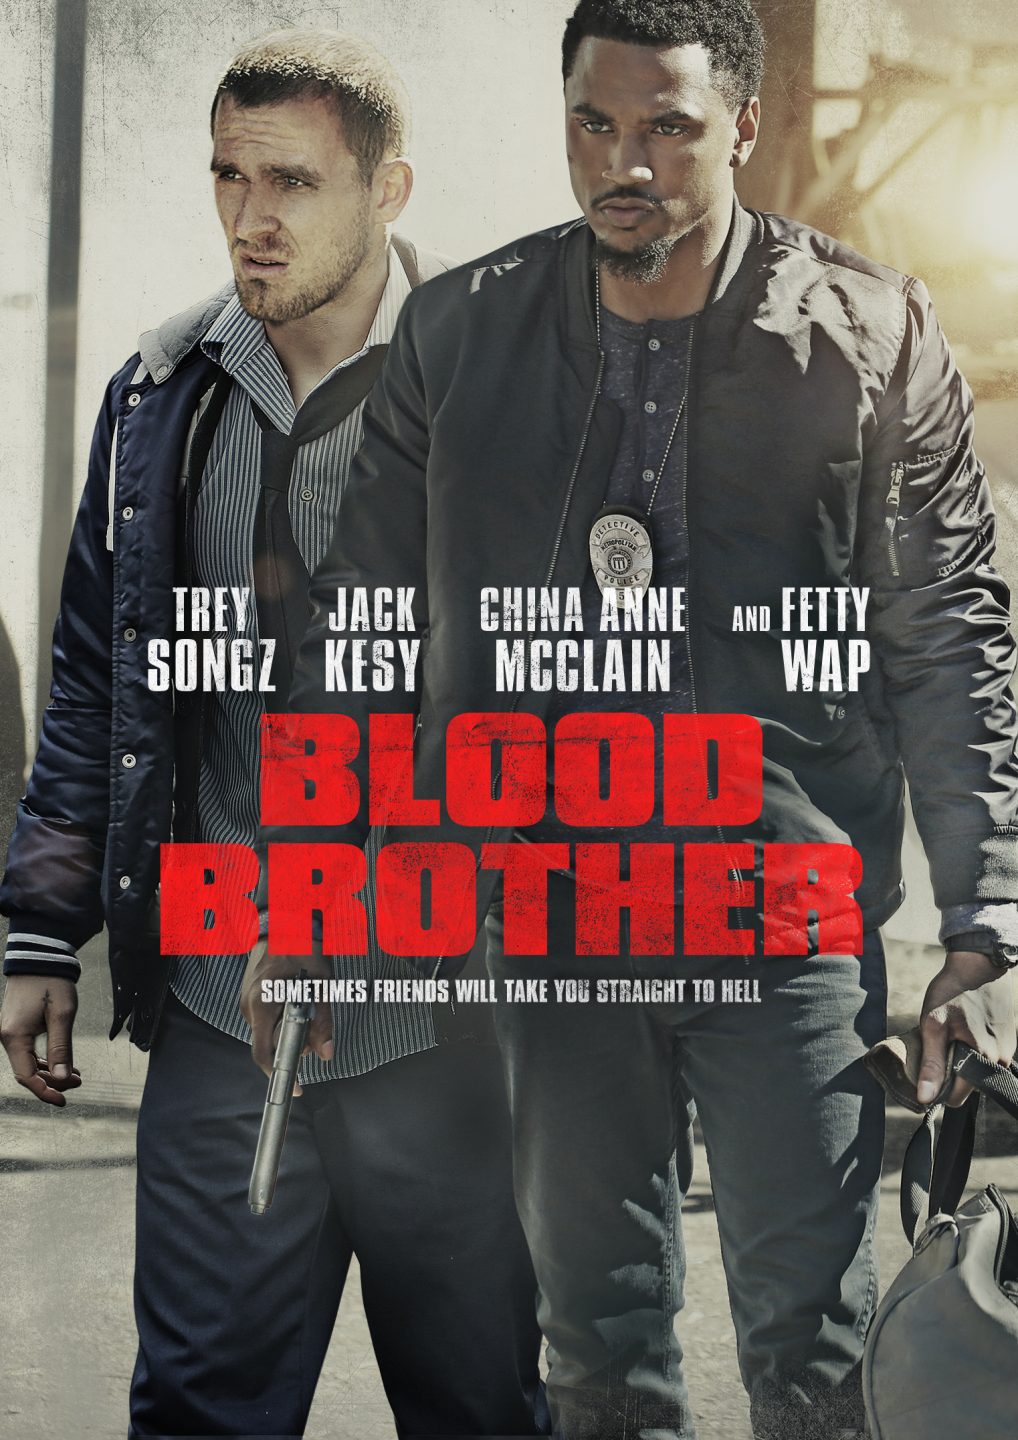 Blood Brother poster (Lionsgate)